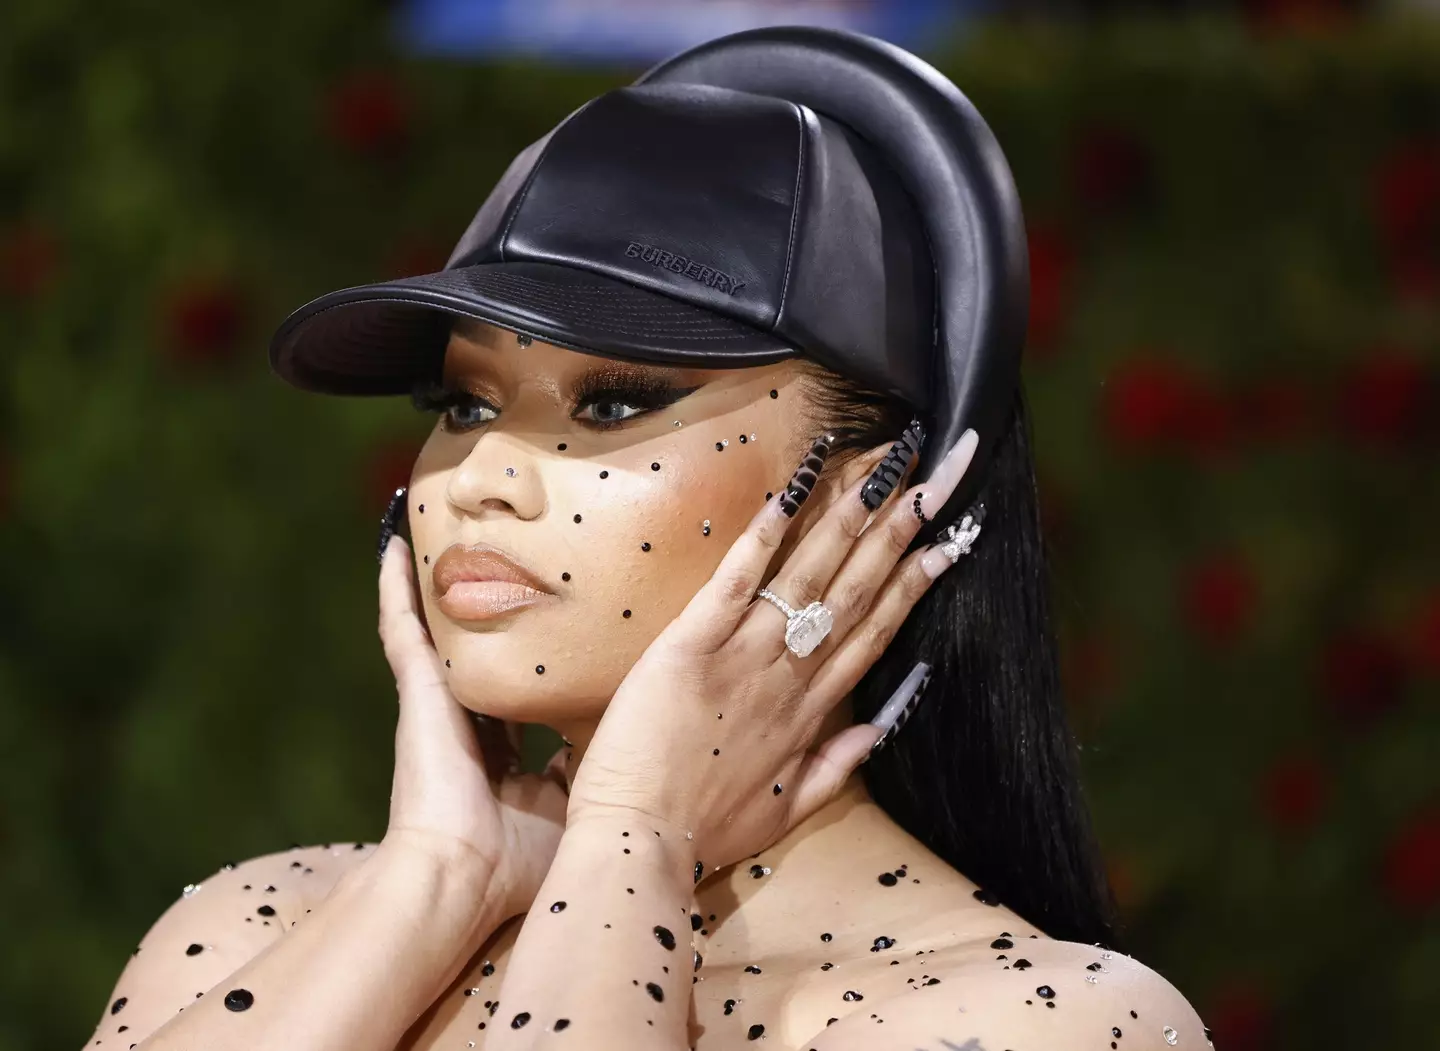 Nicki Minaj is suing a blogger who called her a 'cokehead' that is 'shoving in all this cocaine up her nose'.